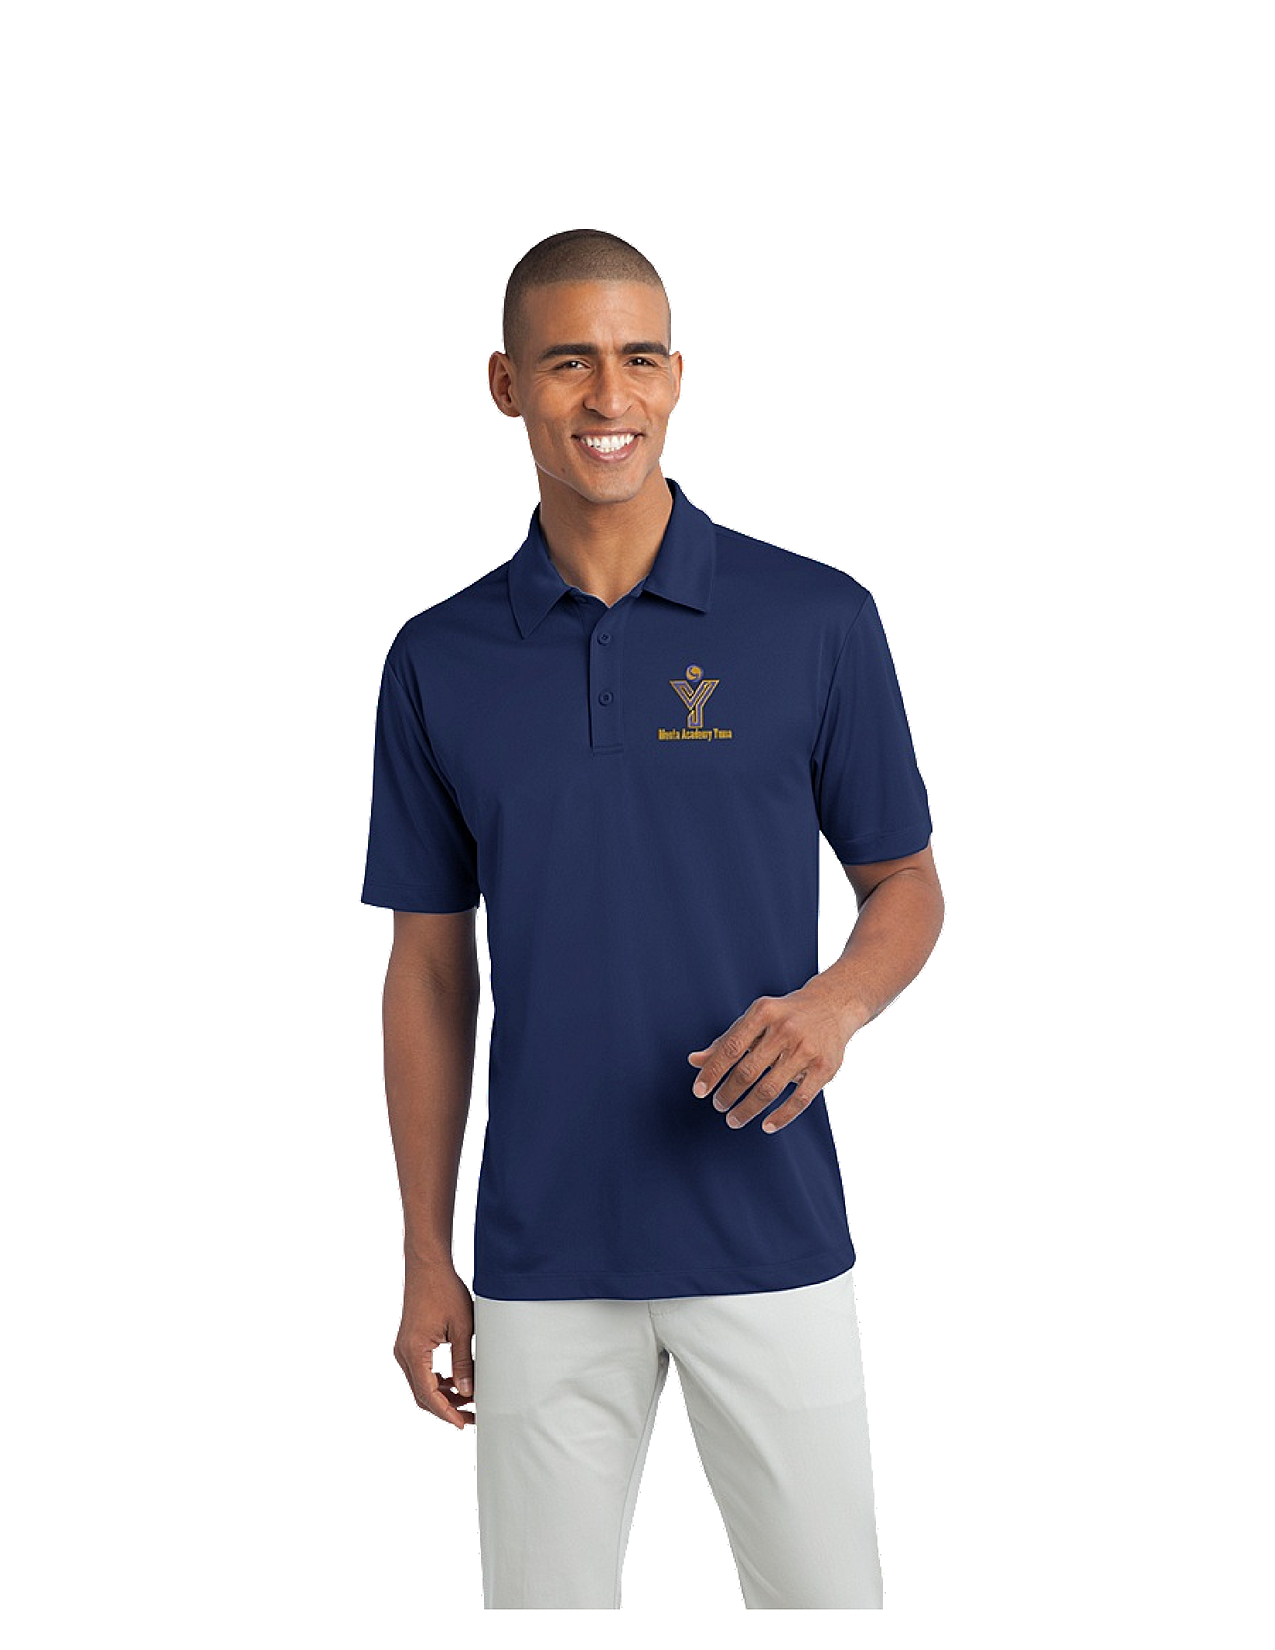 Port AuthorityÂ® Silk Touchâ„¢ Men's Performance Polo - MAY (Performance Polo Color: Royal Blue, Polo Size: XS)